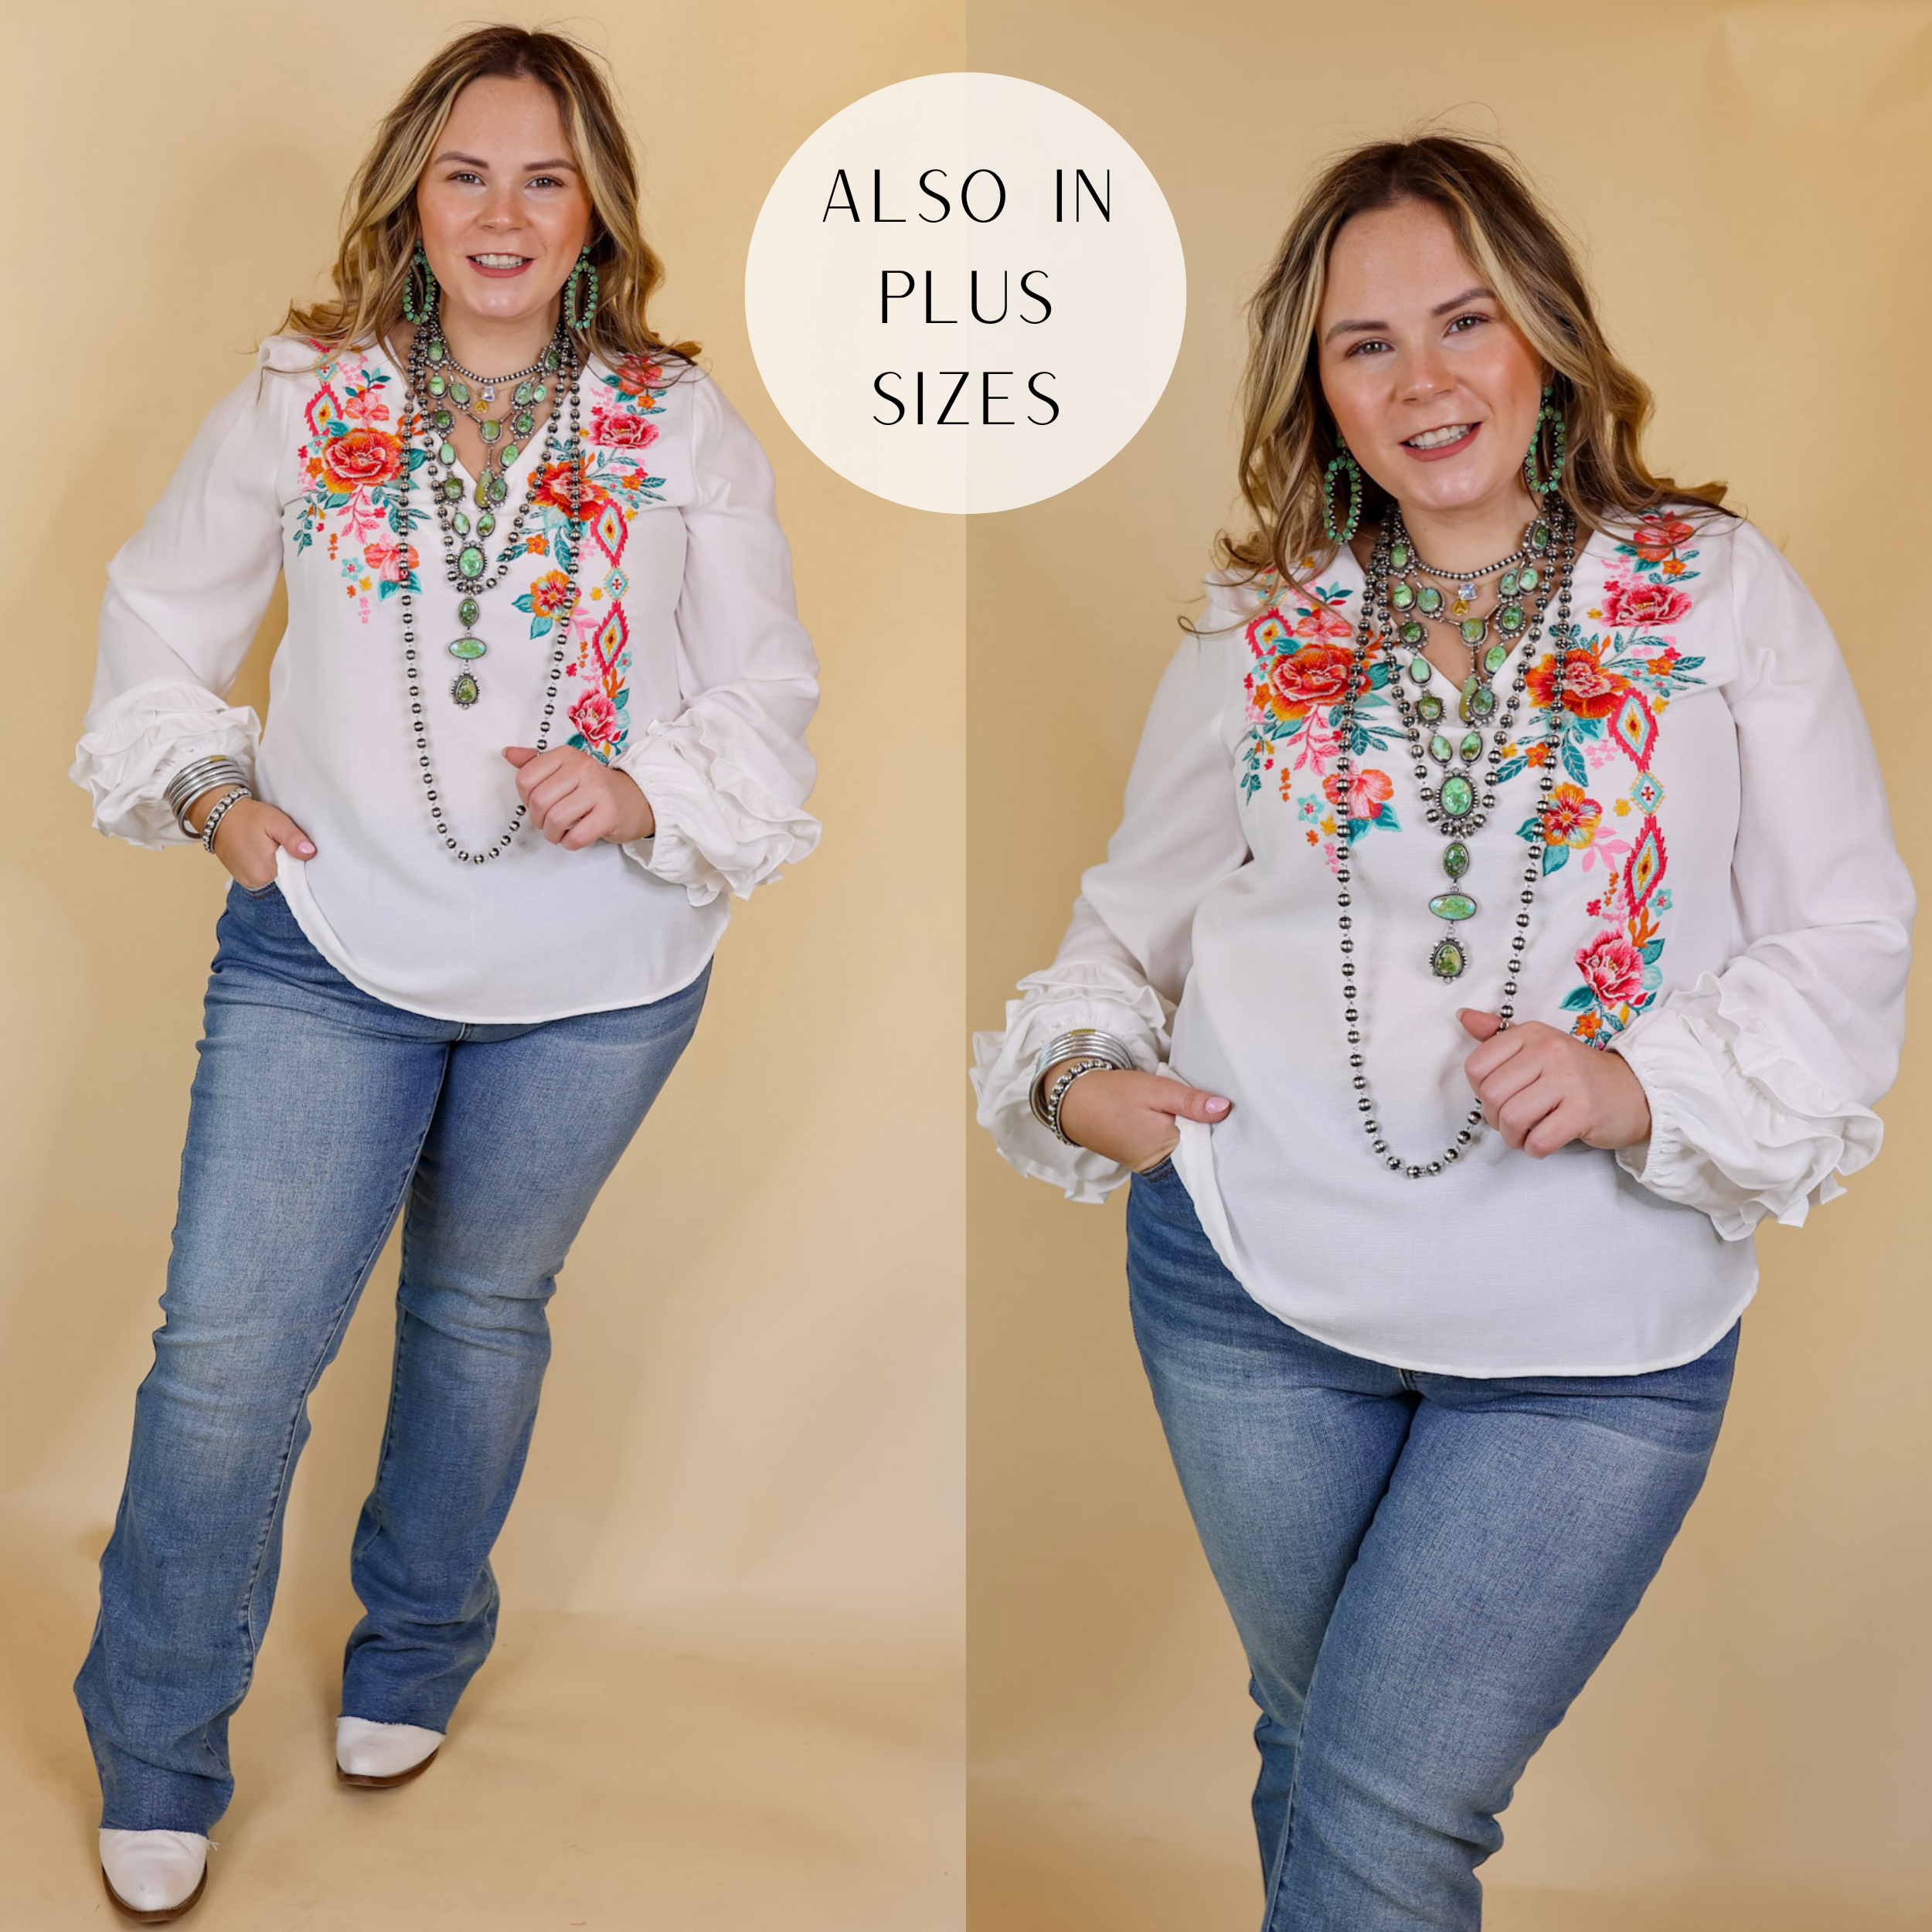 Model is wearing a long sleeve floral embroidered top with long sleeves that ruffle at the wrist in white. Model has this top paired jeans, boots, and Navajo jewelry. 